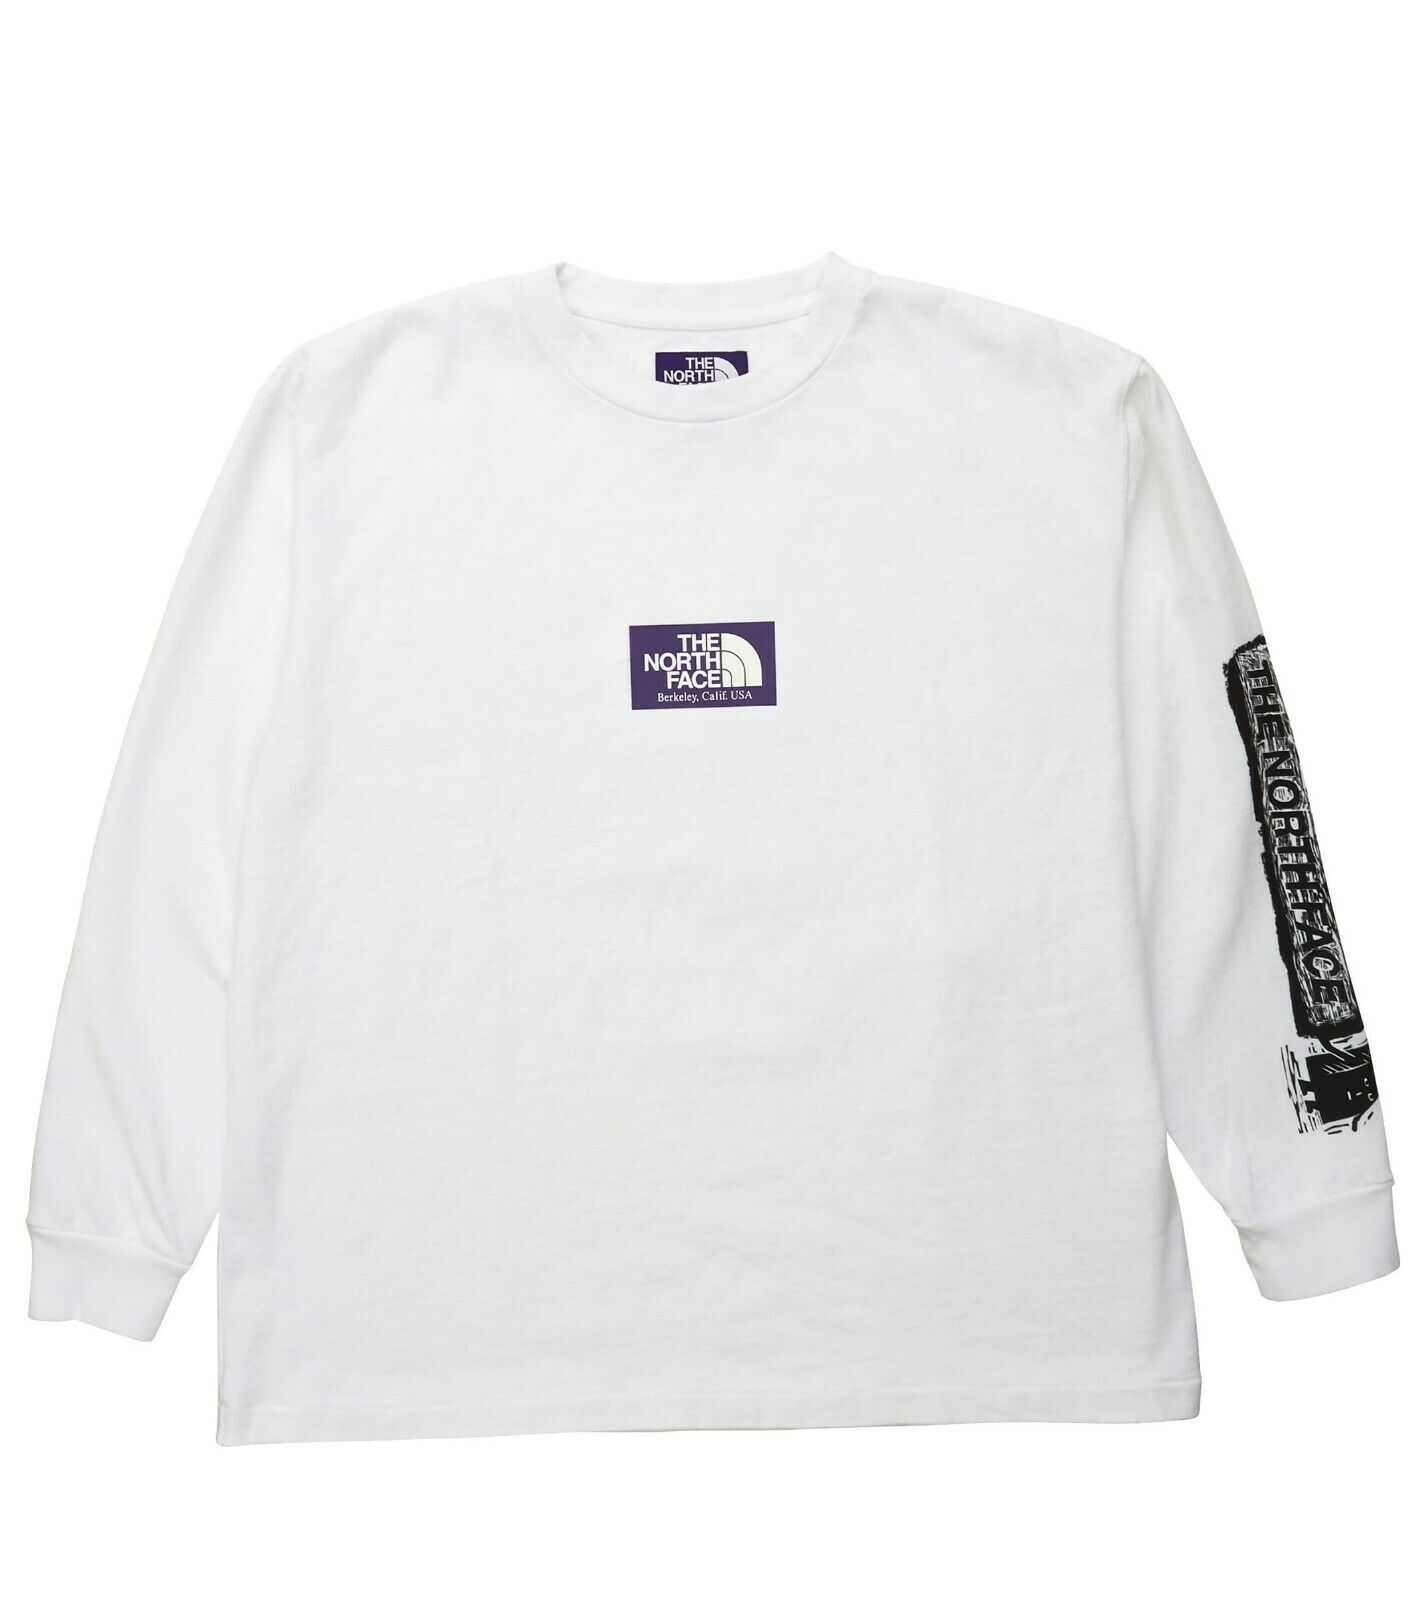 THE NORTH FACE PURPLE LABEL 8oz L/S Logo Tee Long Sleev